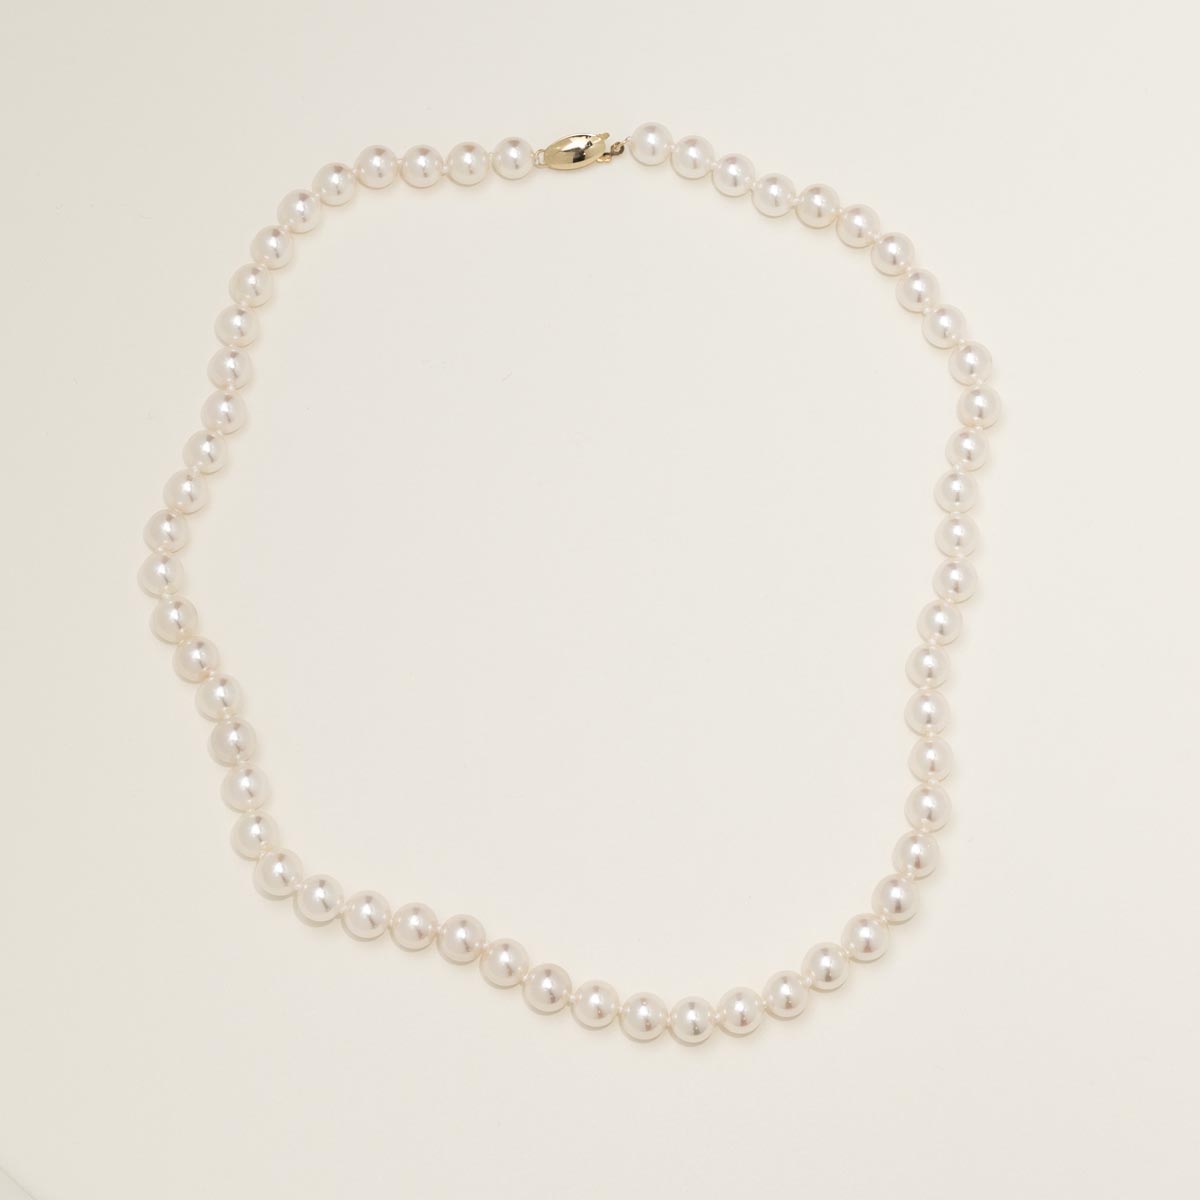 Mastoloni Cultured Akoya Pearl Strand Necklace in 14kt Yellow Gold (7.5-8mm pearls)